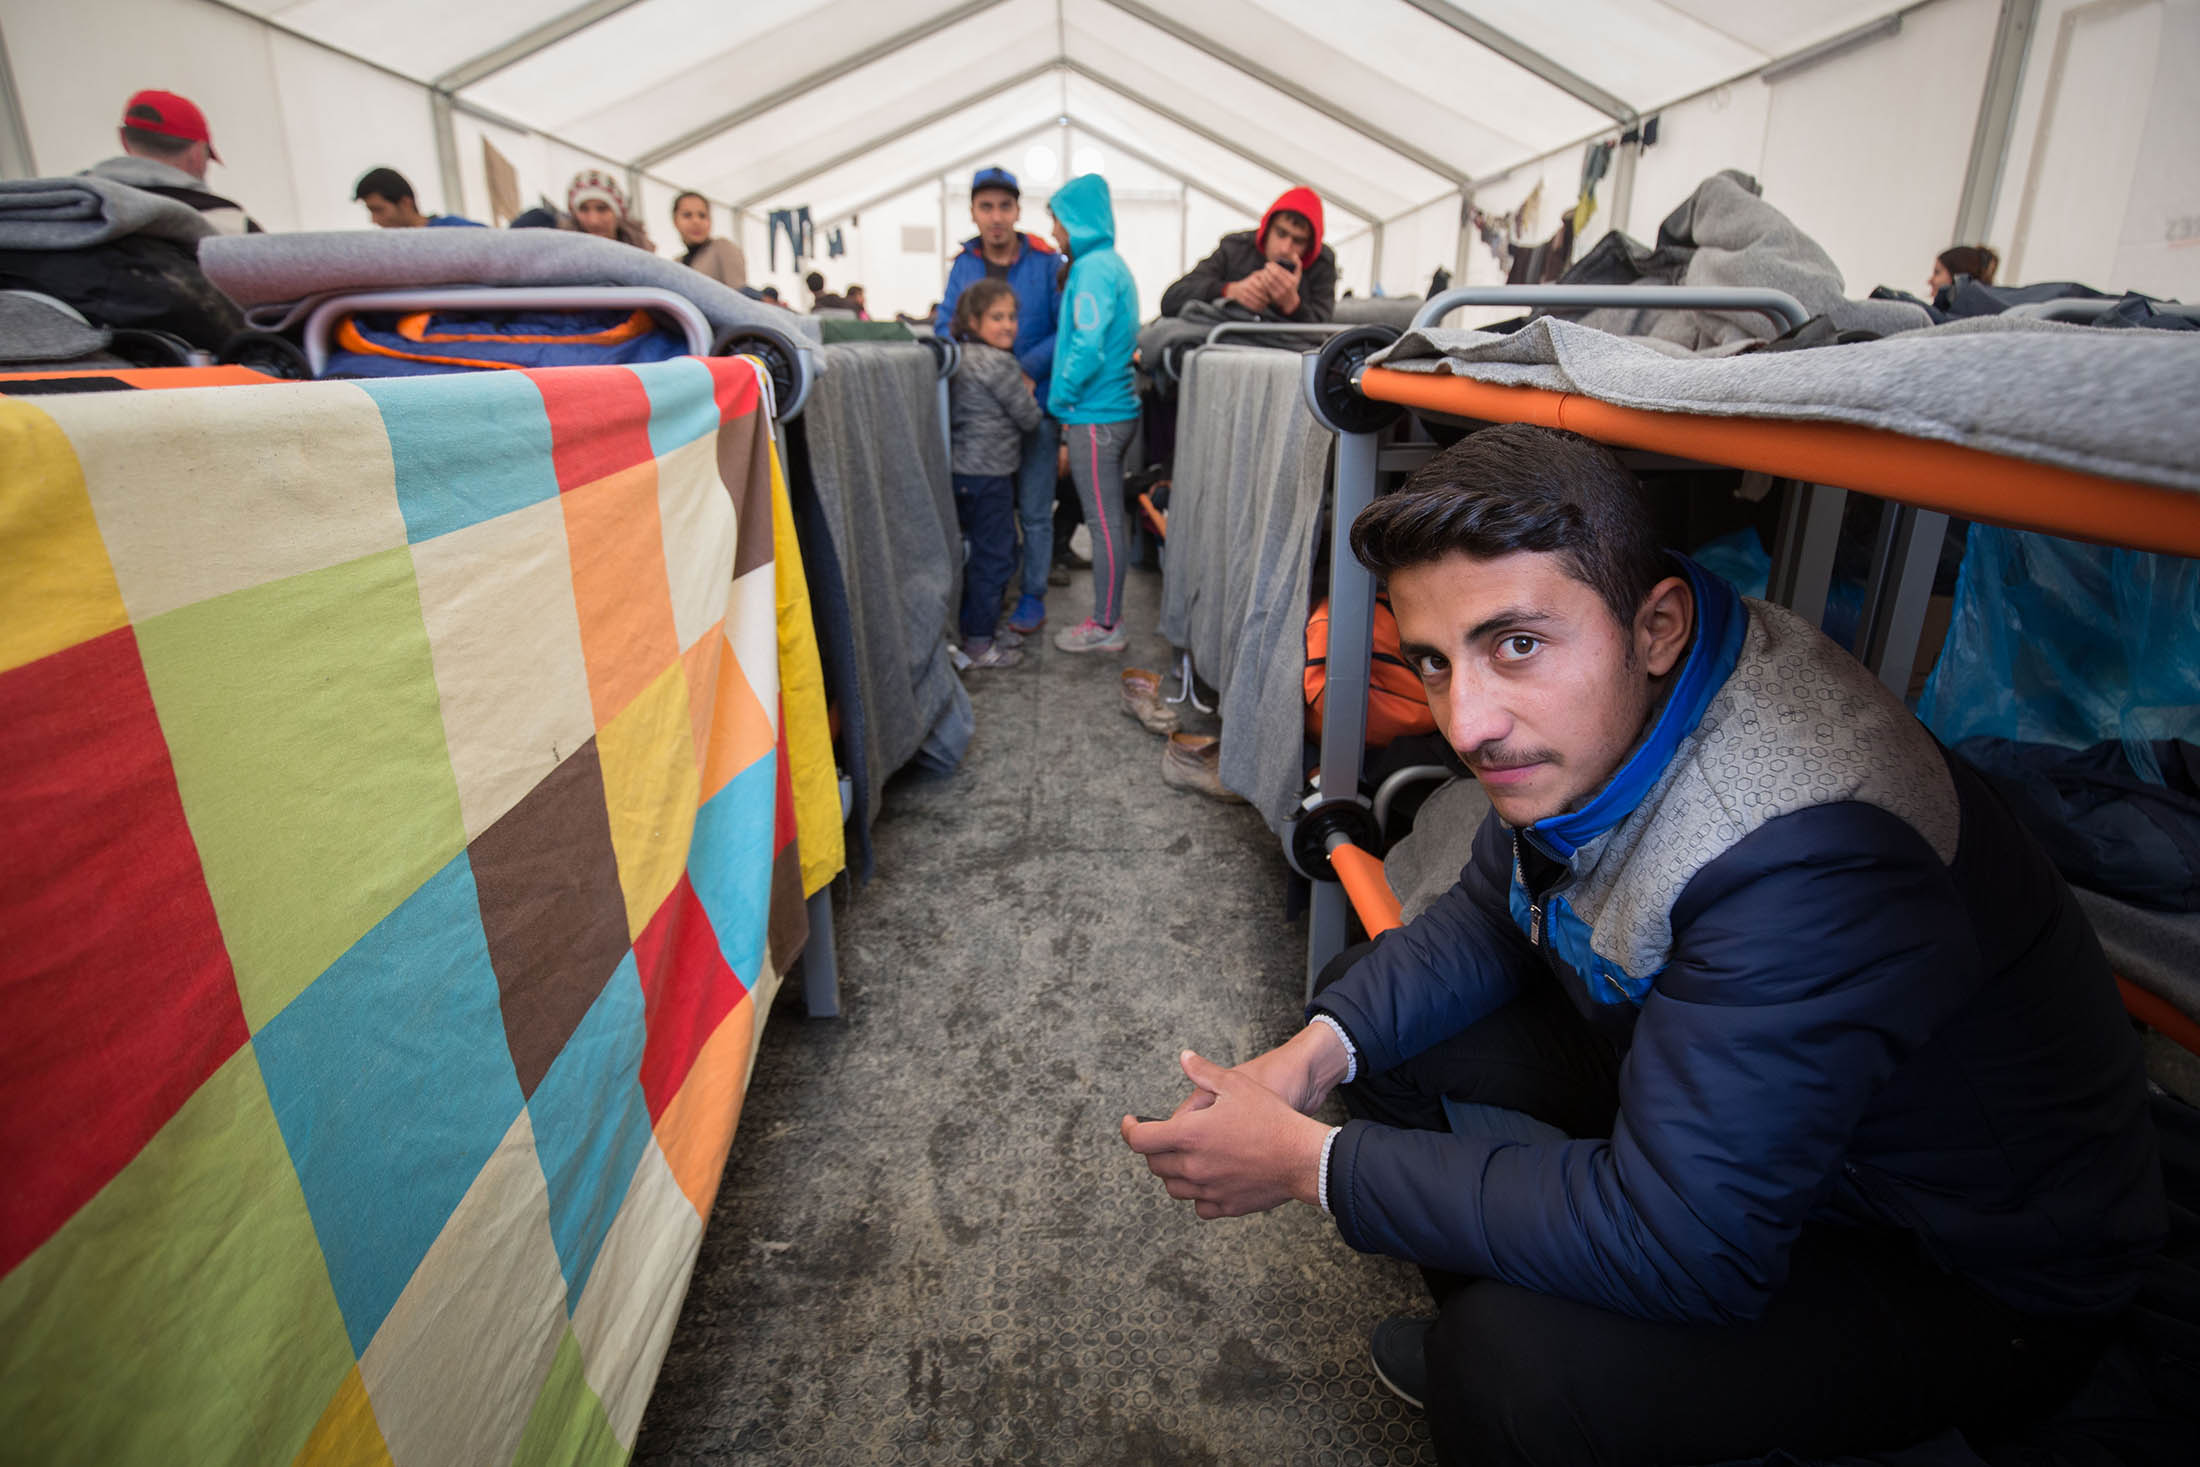 A man sits on his bunk bed inside a accommodation tent at the Idomeni refugee camp on the Greek Macedonia border on March 16.
